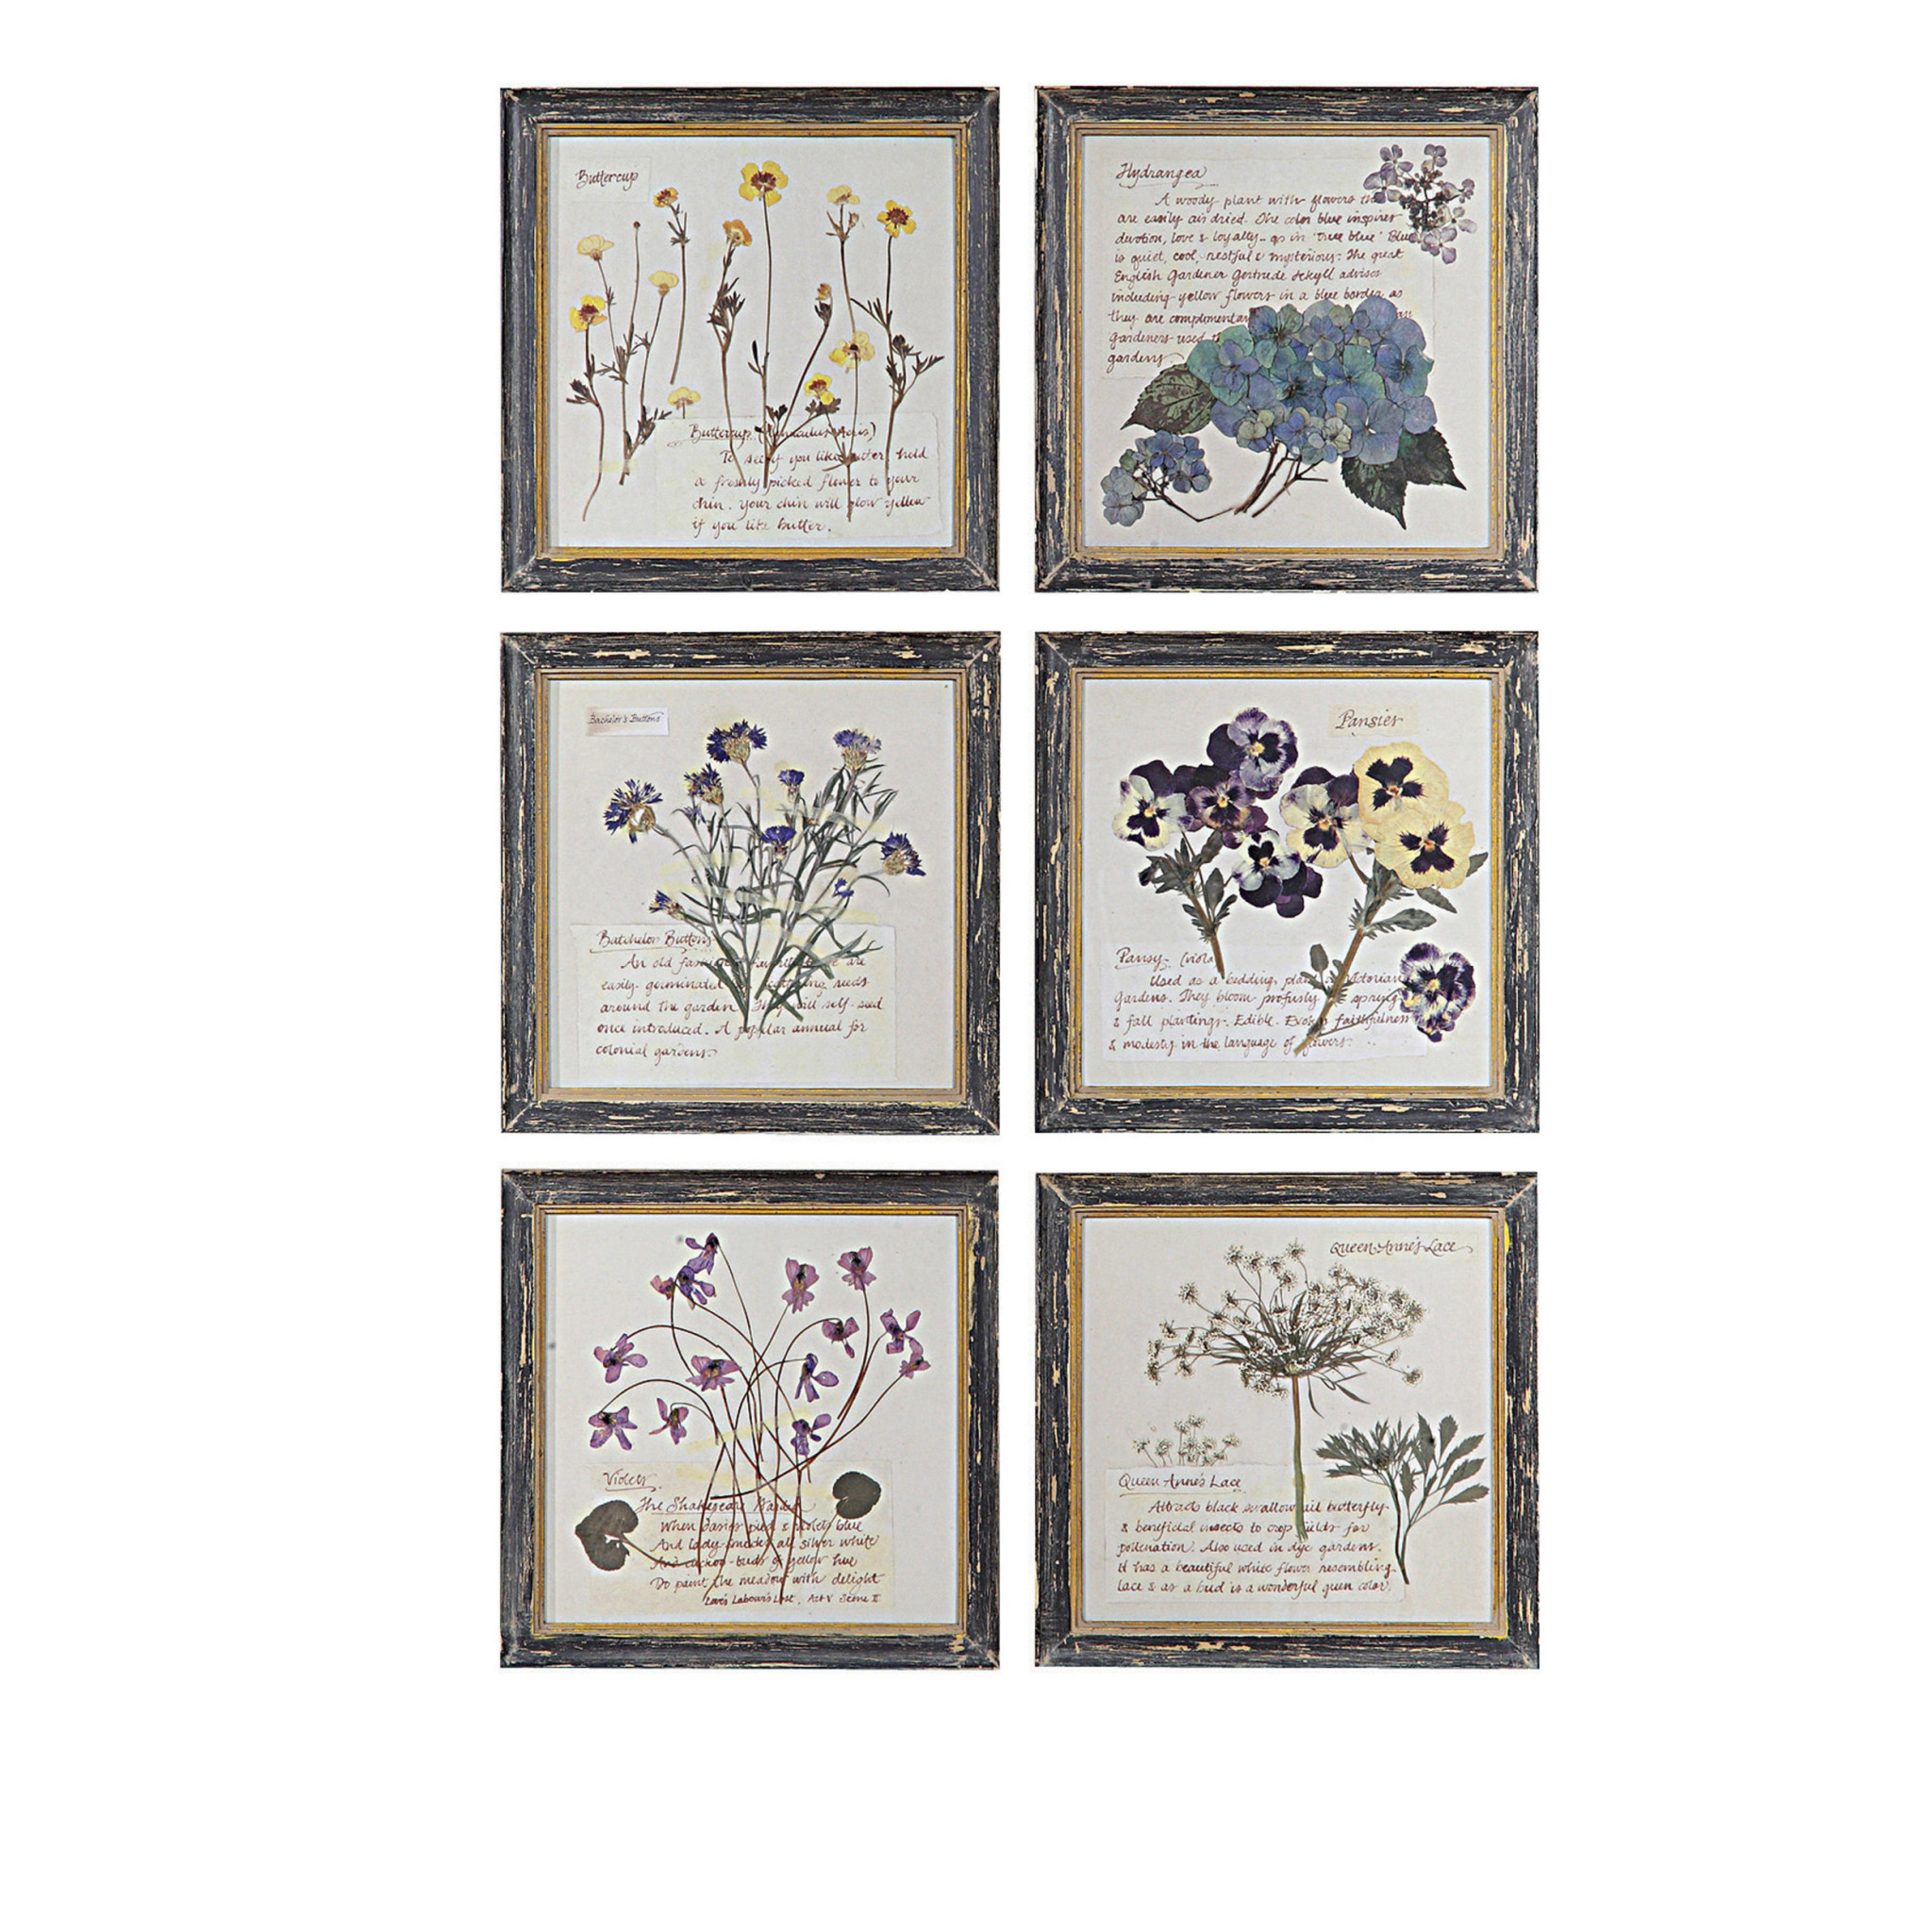 Framed Wall Decor with Floral Image 10x10